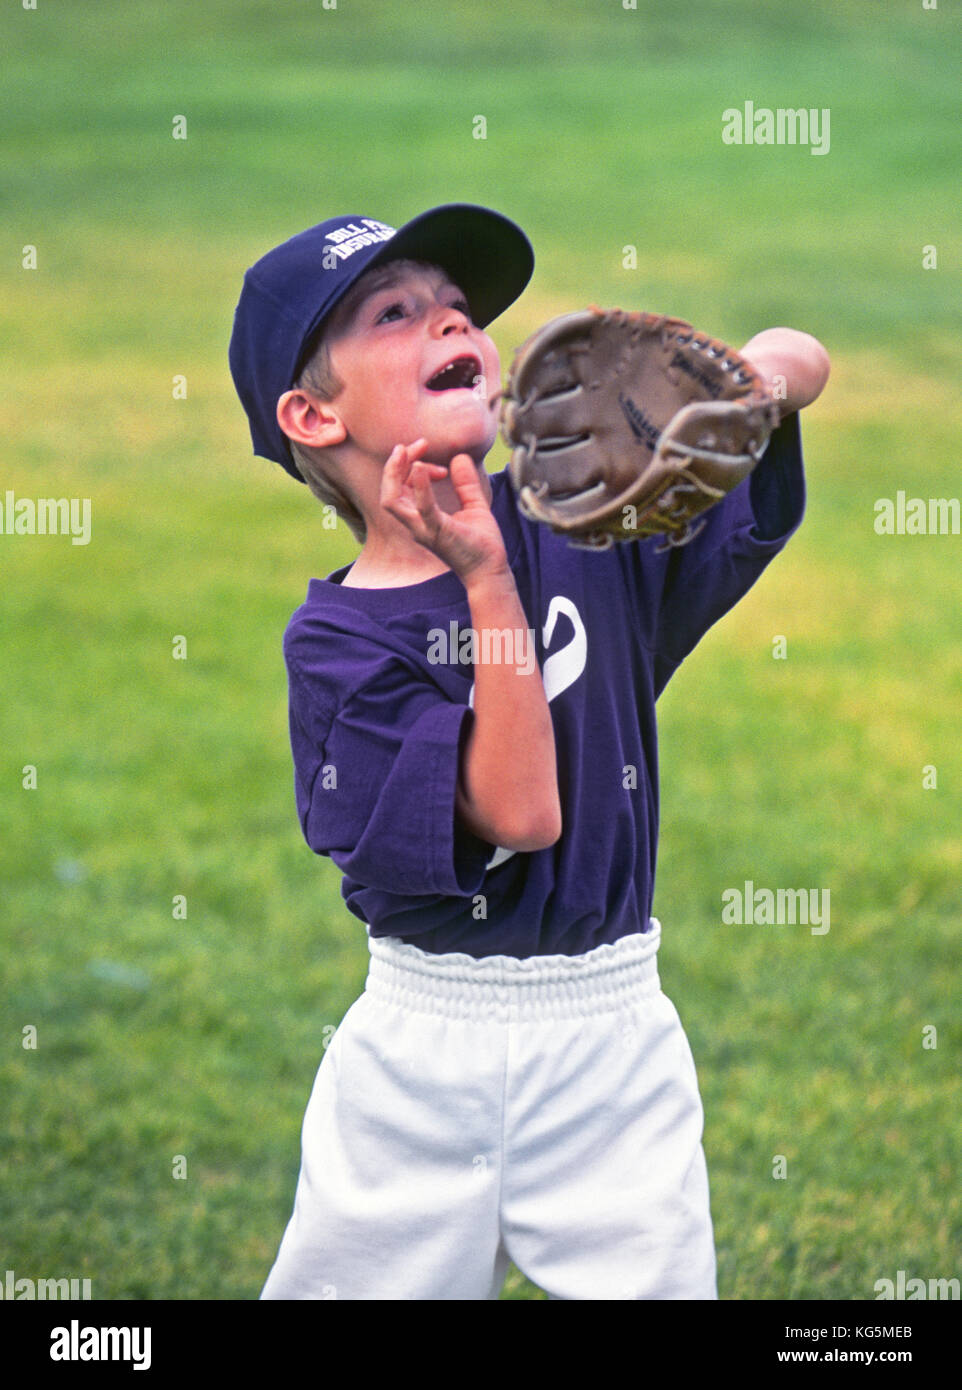 A young boy playing Little League Baseball, prepares to catch a pop fly ball. Stock Photo